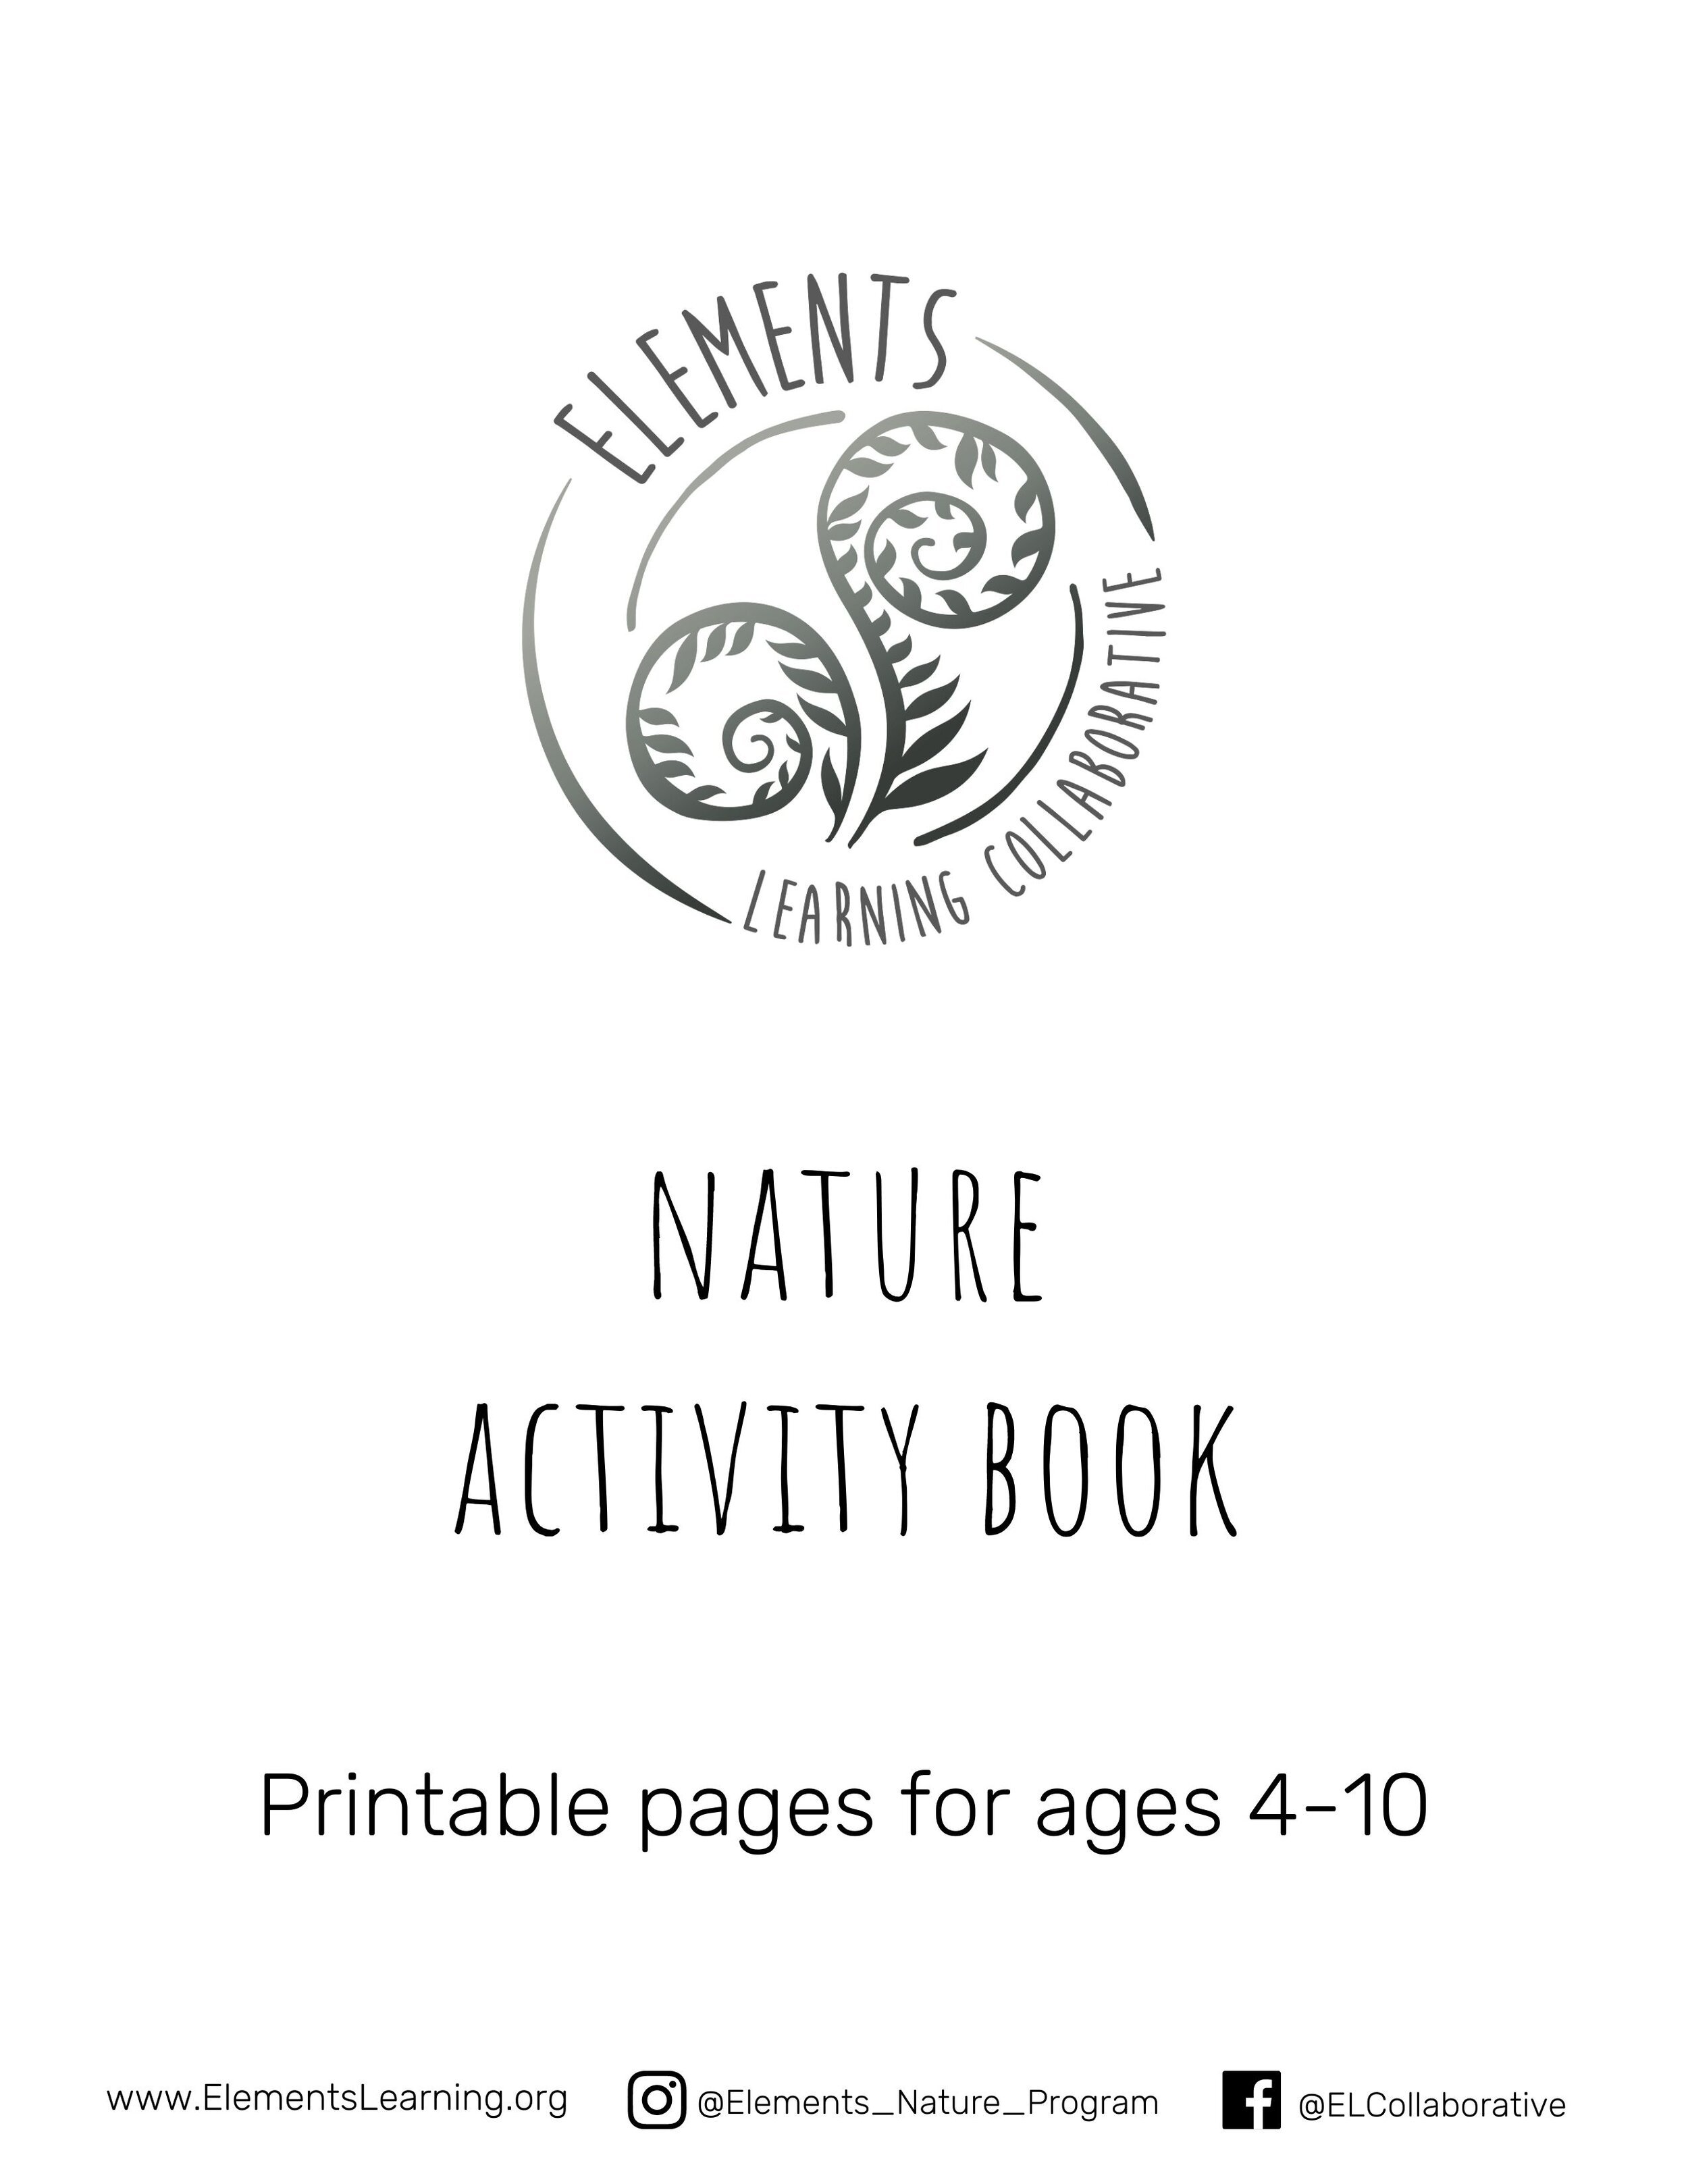 Elements+Activity+Book+cover.jpeg